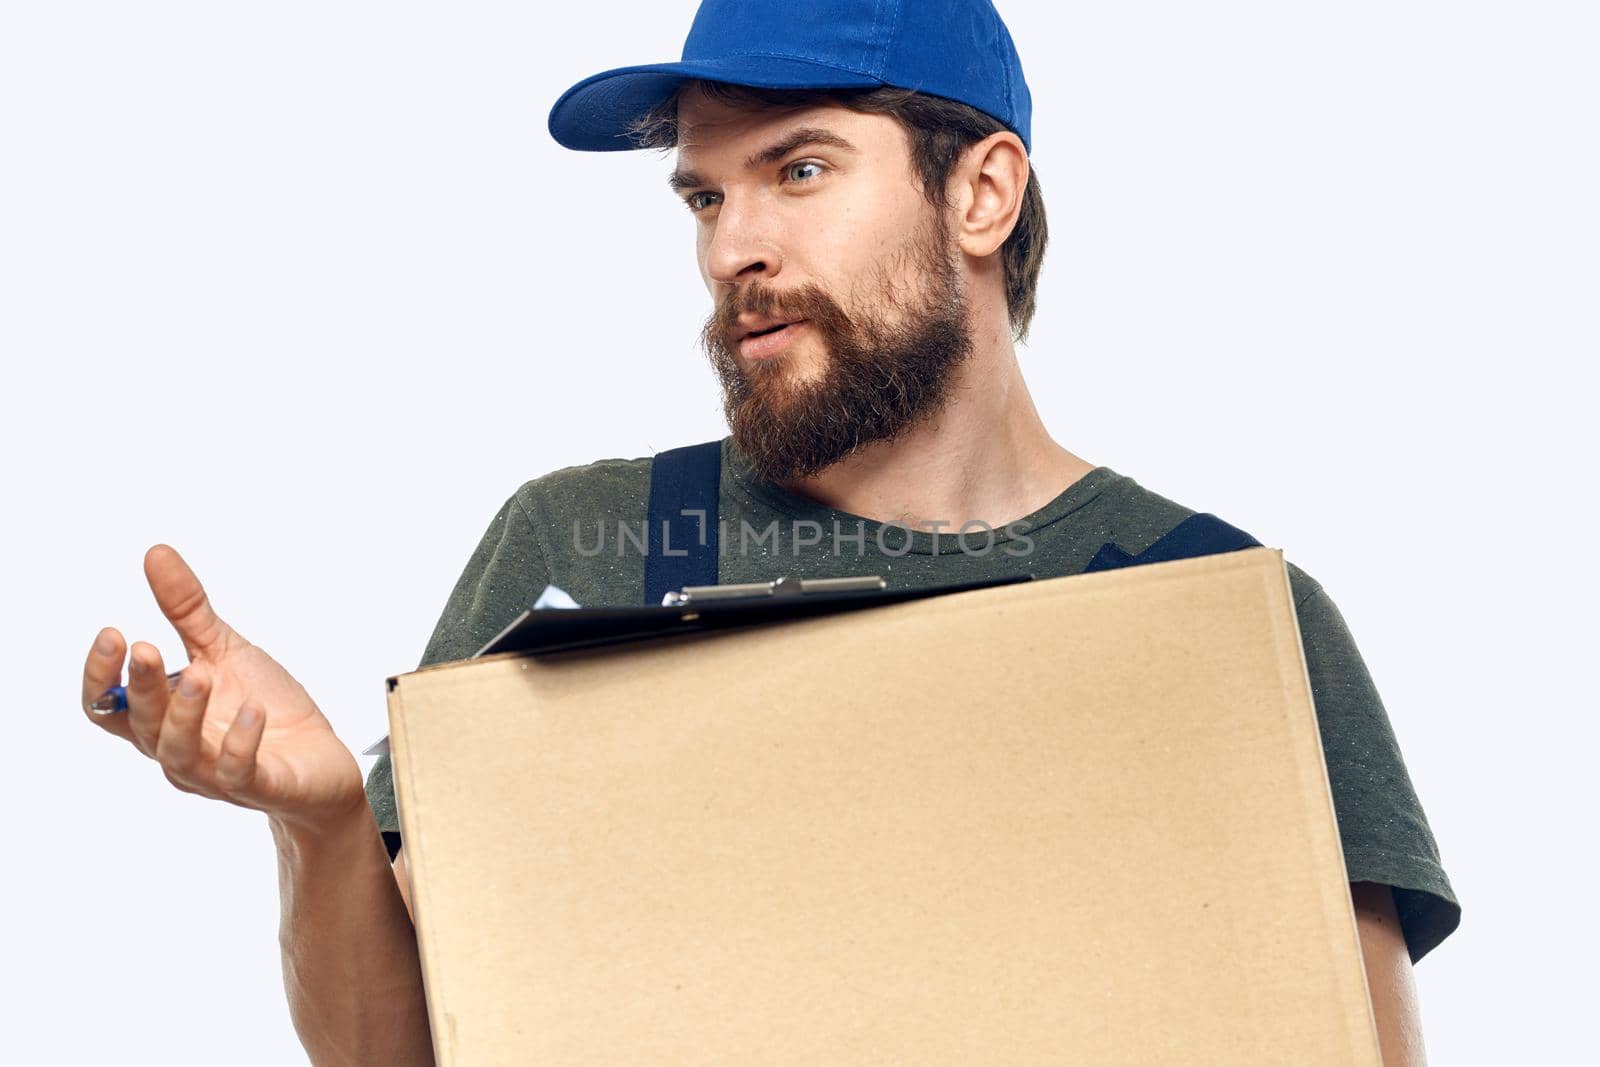 male working uniform box delivery by courier professional. High quality photo